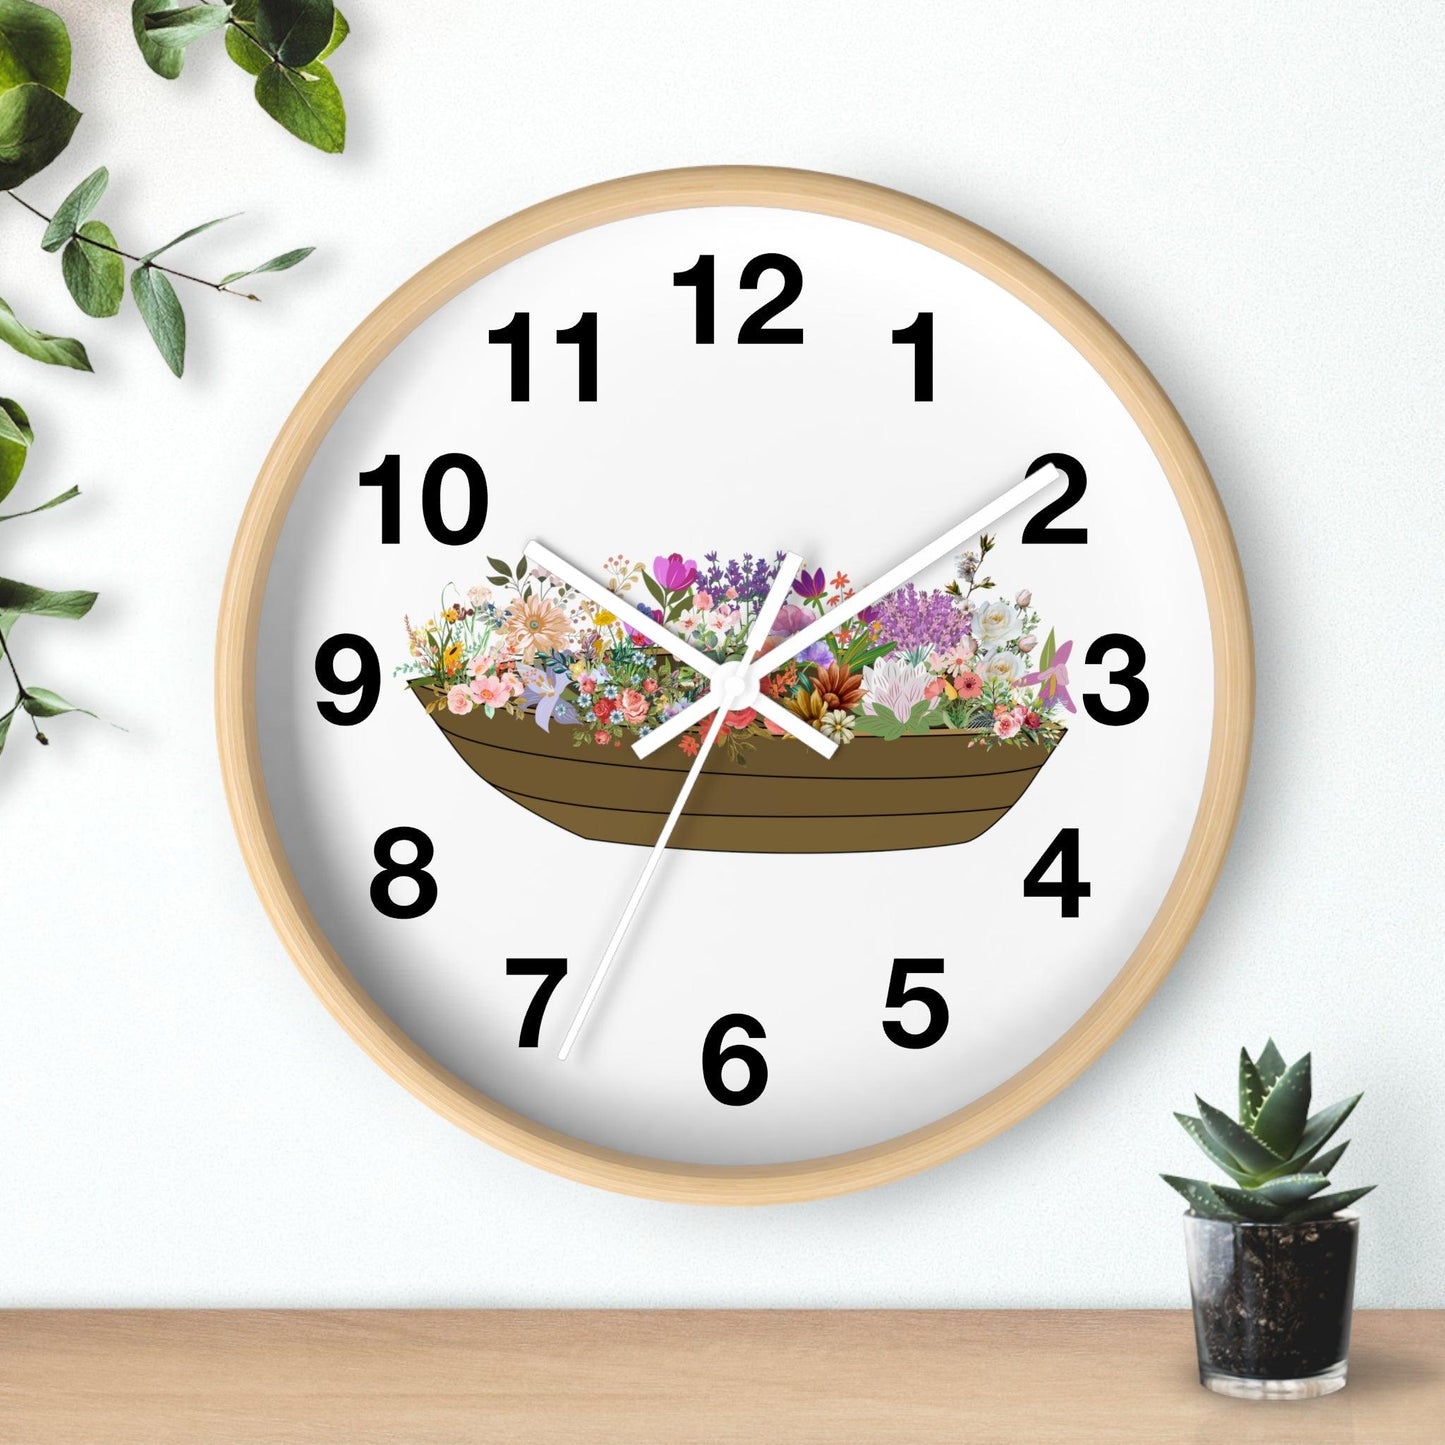 Boat Flower Wall Clock Floral Wall Clock Home Decor Gift House Warming gift - Unique Gift Farmhouse Clocks For Wall Living Room Bedroom - Giftsmojo